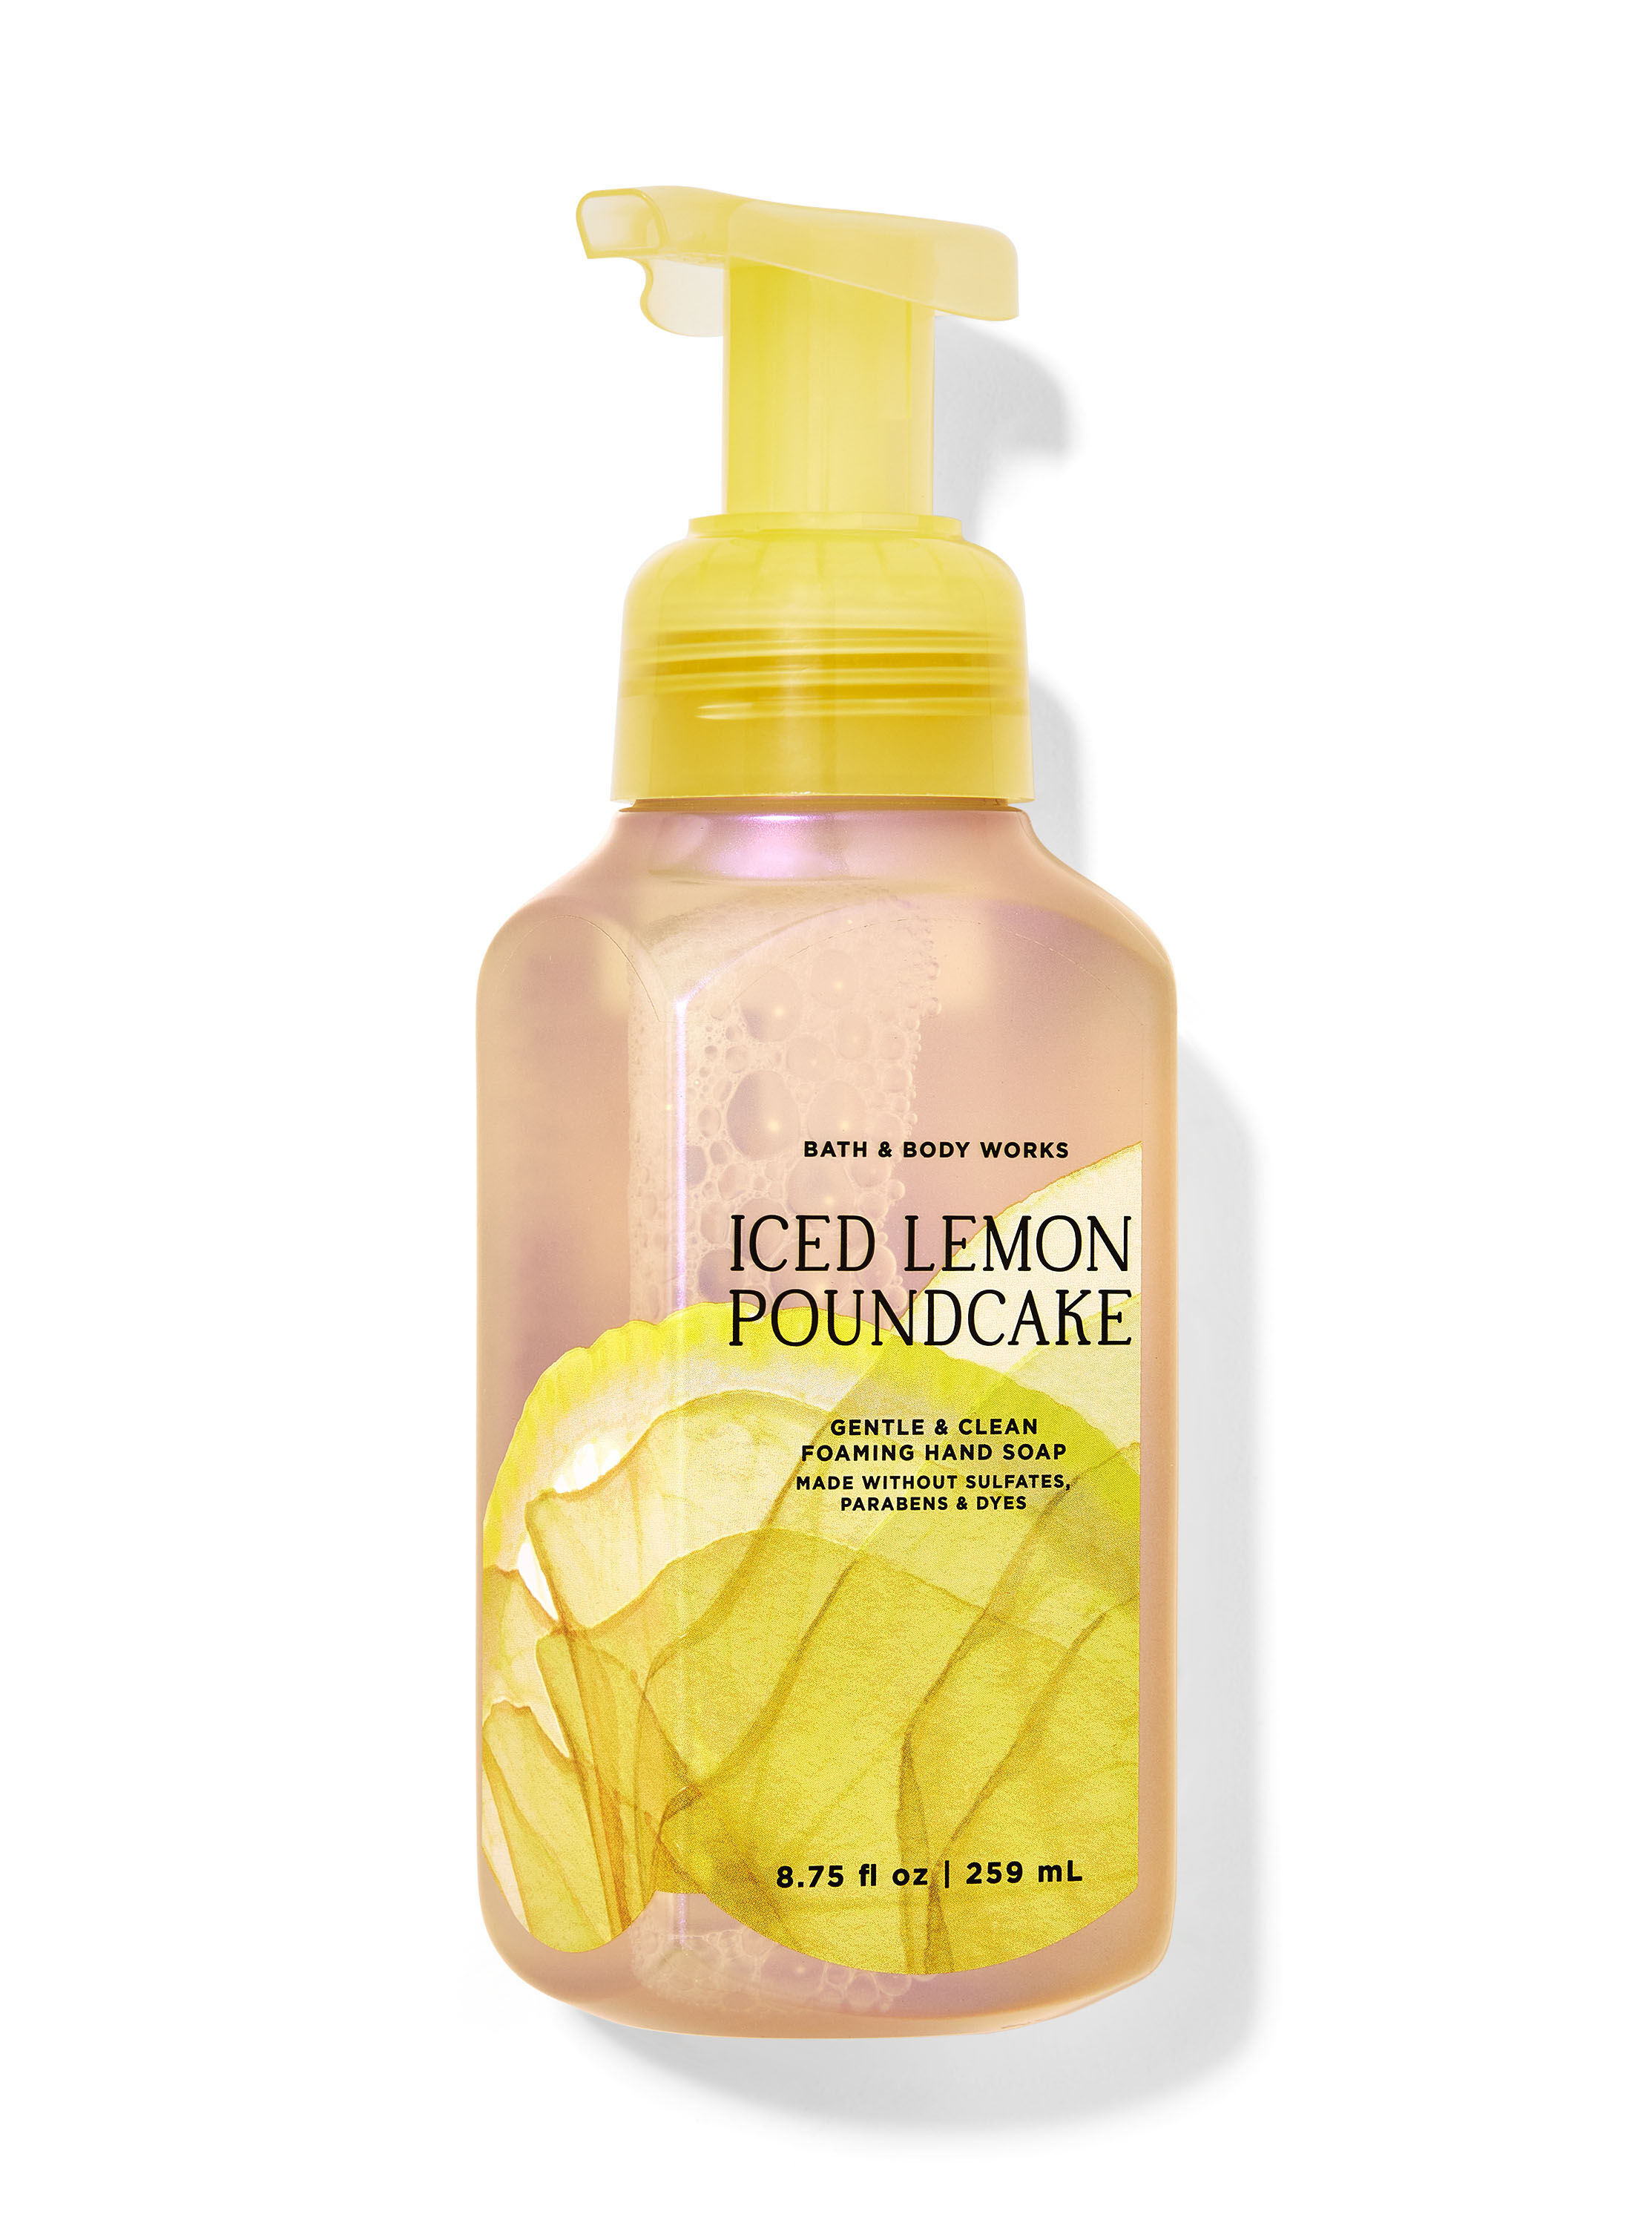 Iced Lemon Pound Cake Gentle & Clean Foaming Hand Soap